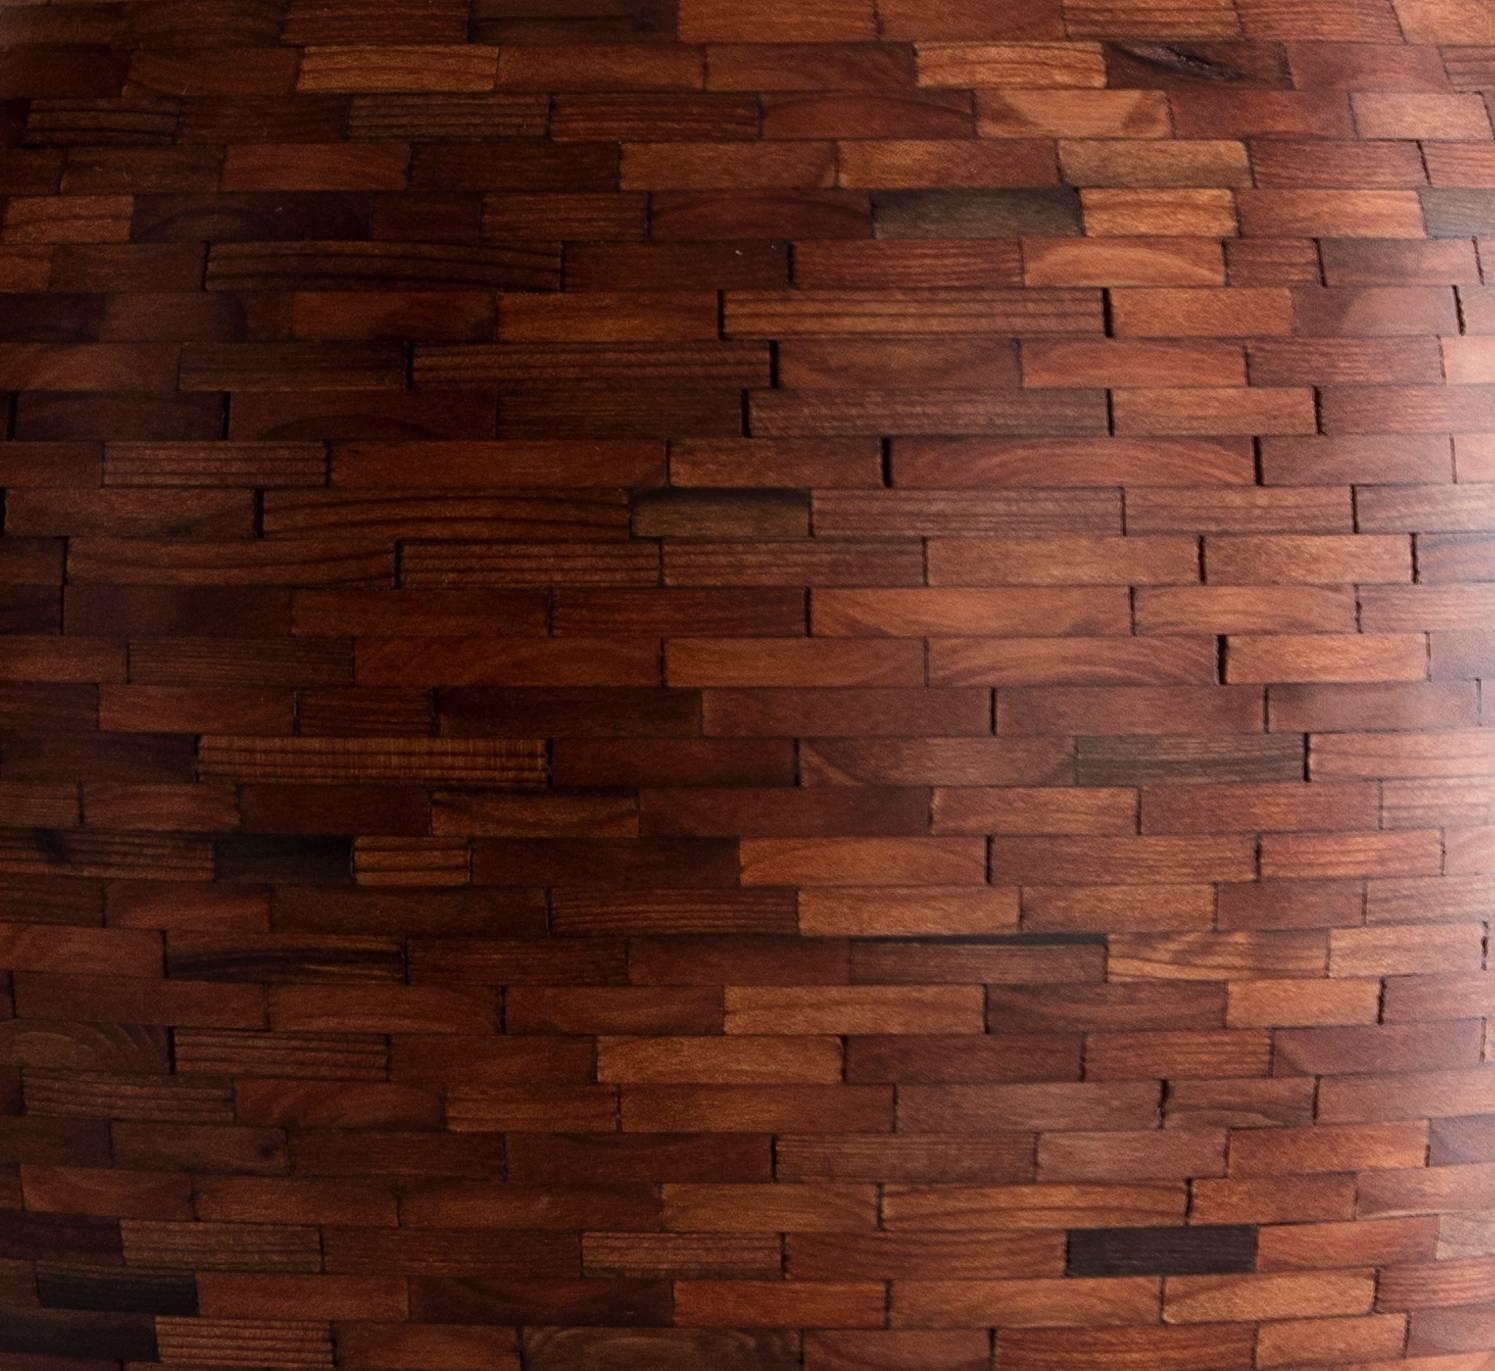 Modern STACKED California Redwood Vase by Richard Haining, Available now